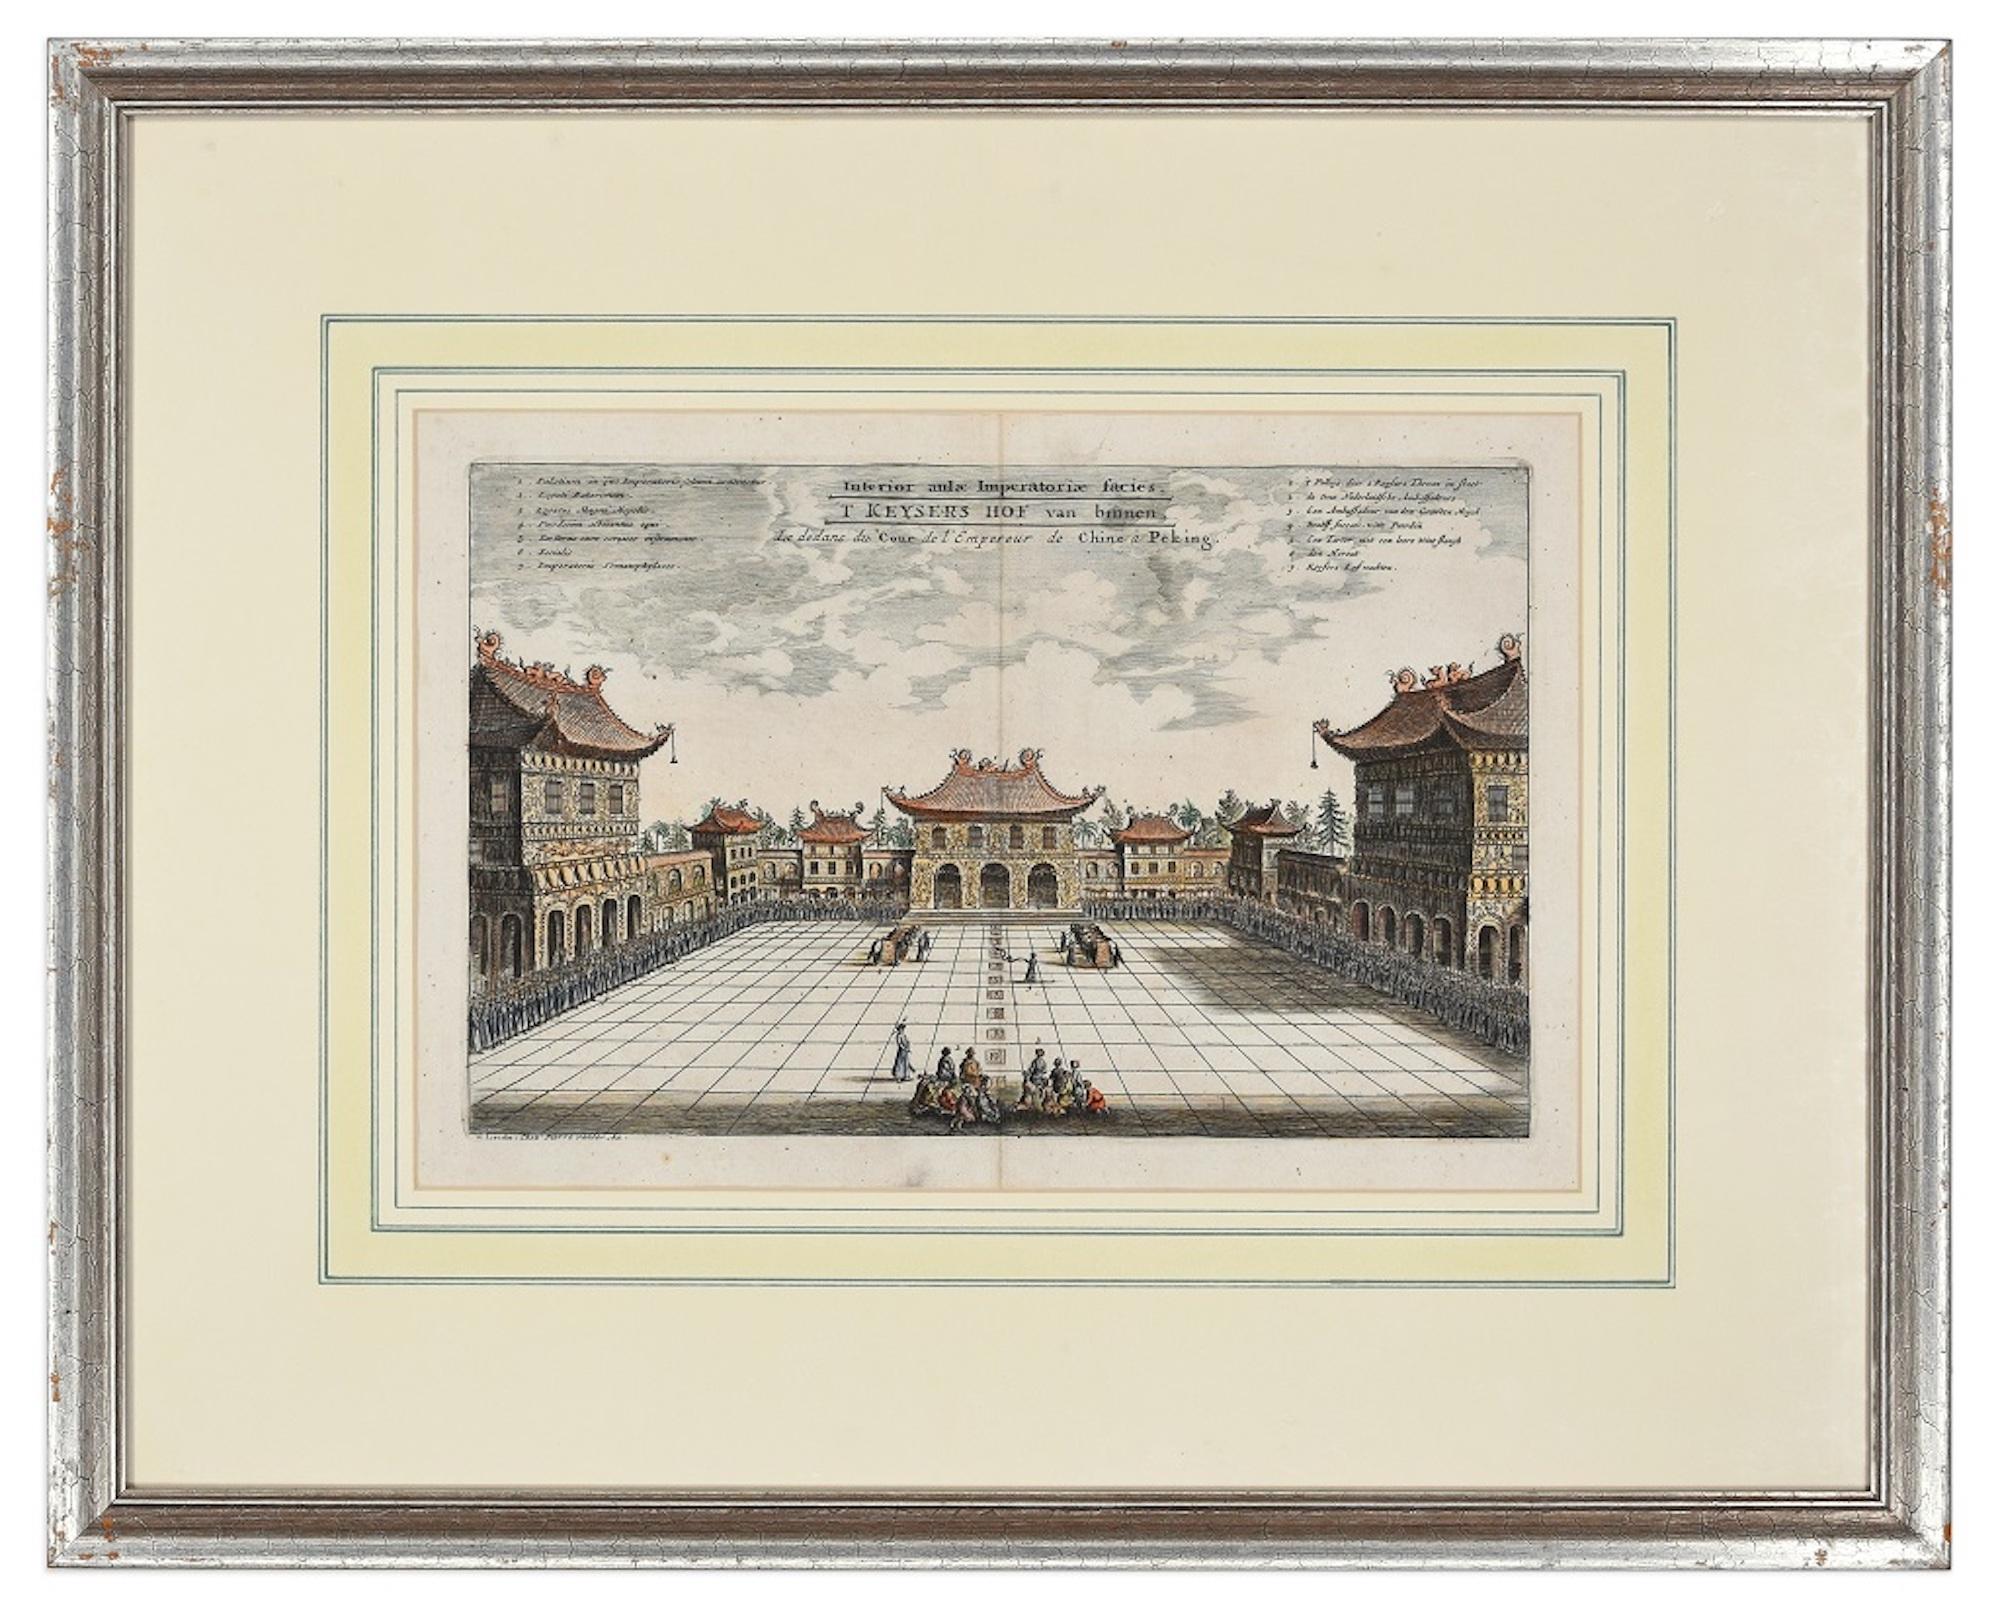 The Chinese Imperial Palace - Original Hand Watercolored Etching by A. Leide - Print by Pieter Van Der Aa